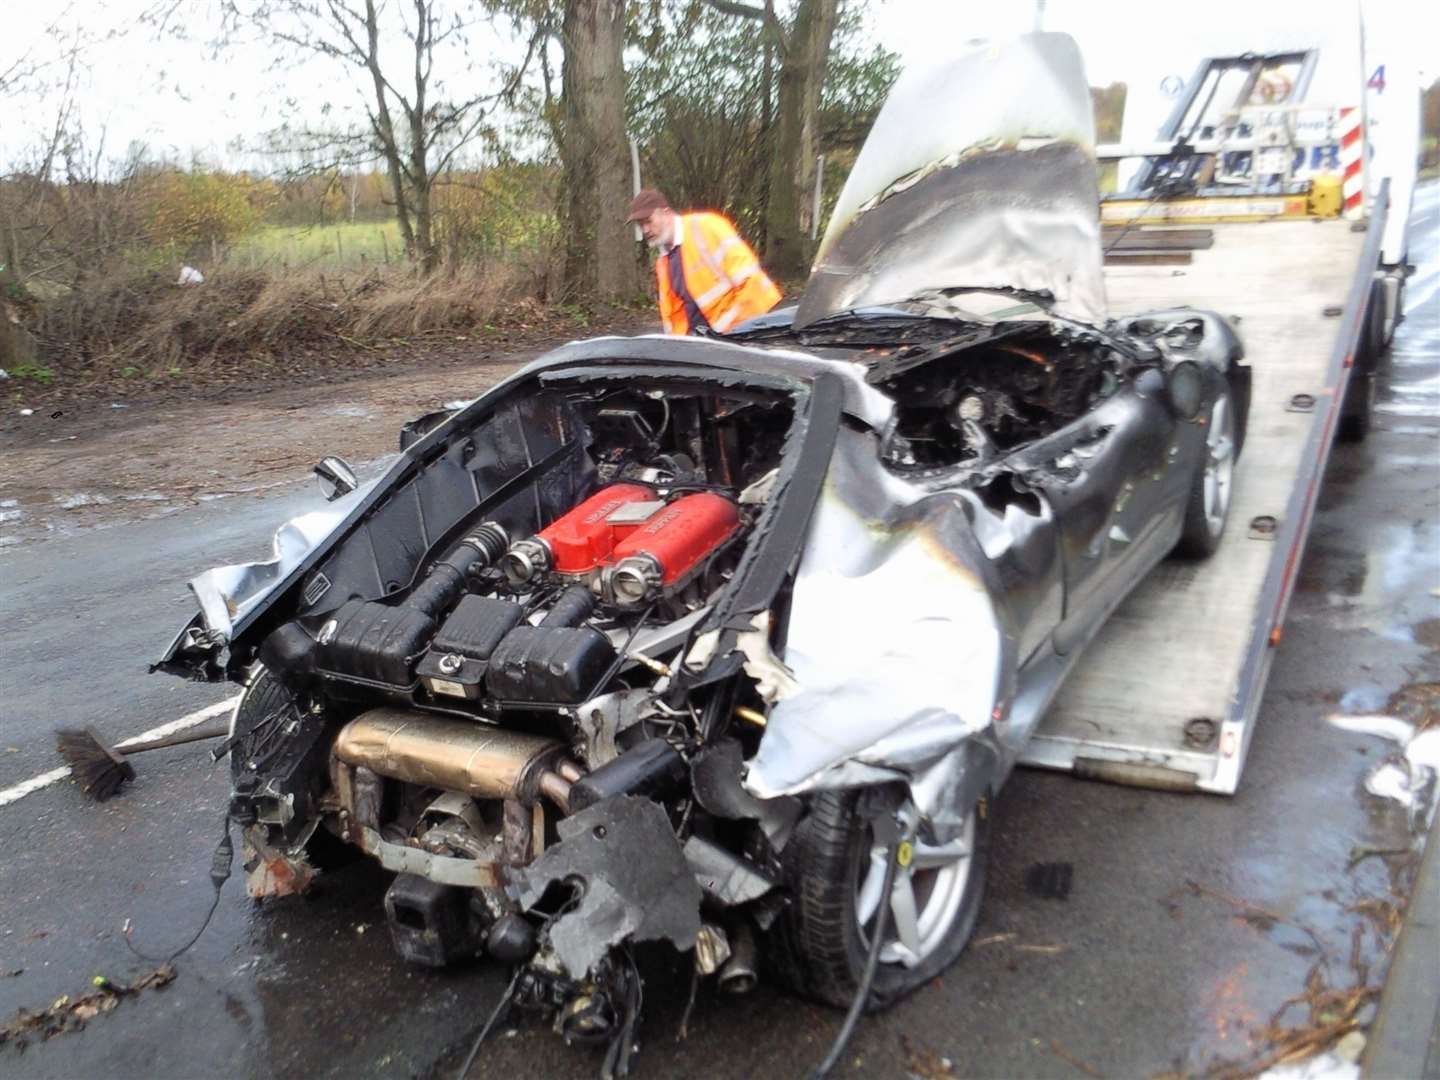 A Ferrari was wrecked when the driver lost control and smashed into the building in November 2009. Picture: Ashford Borough Council